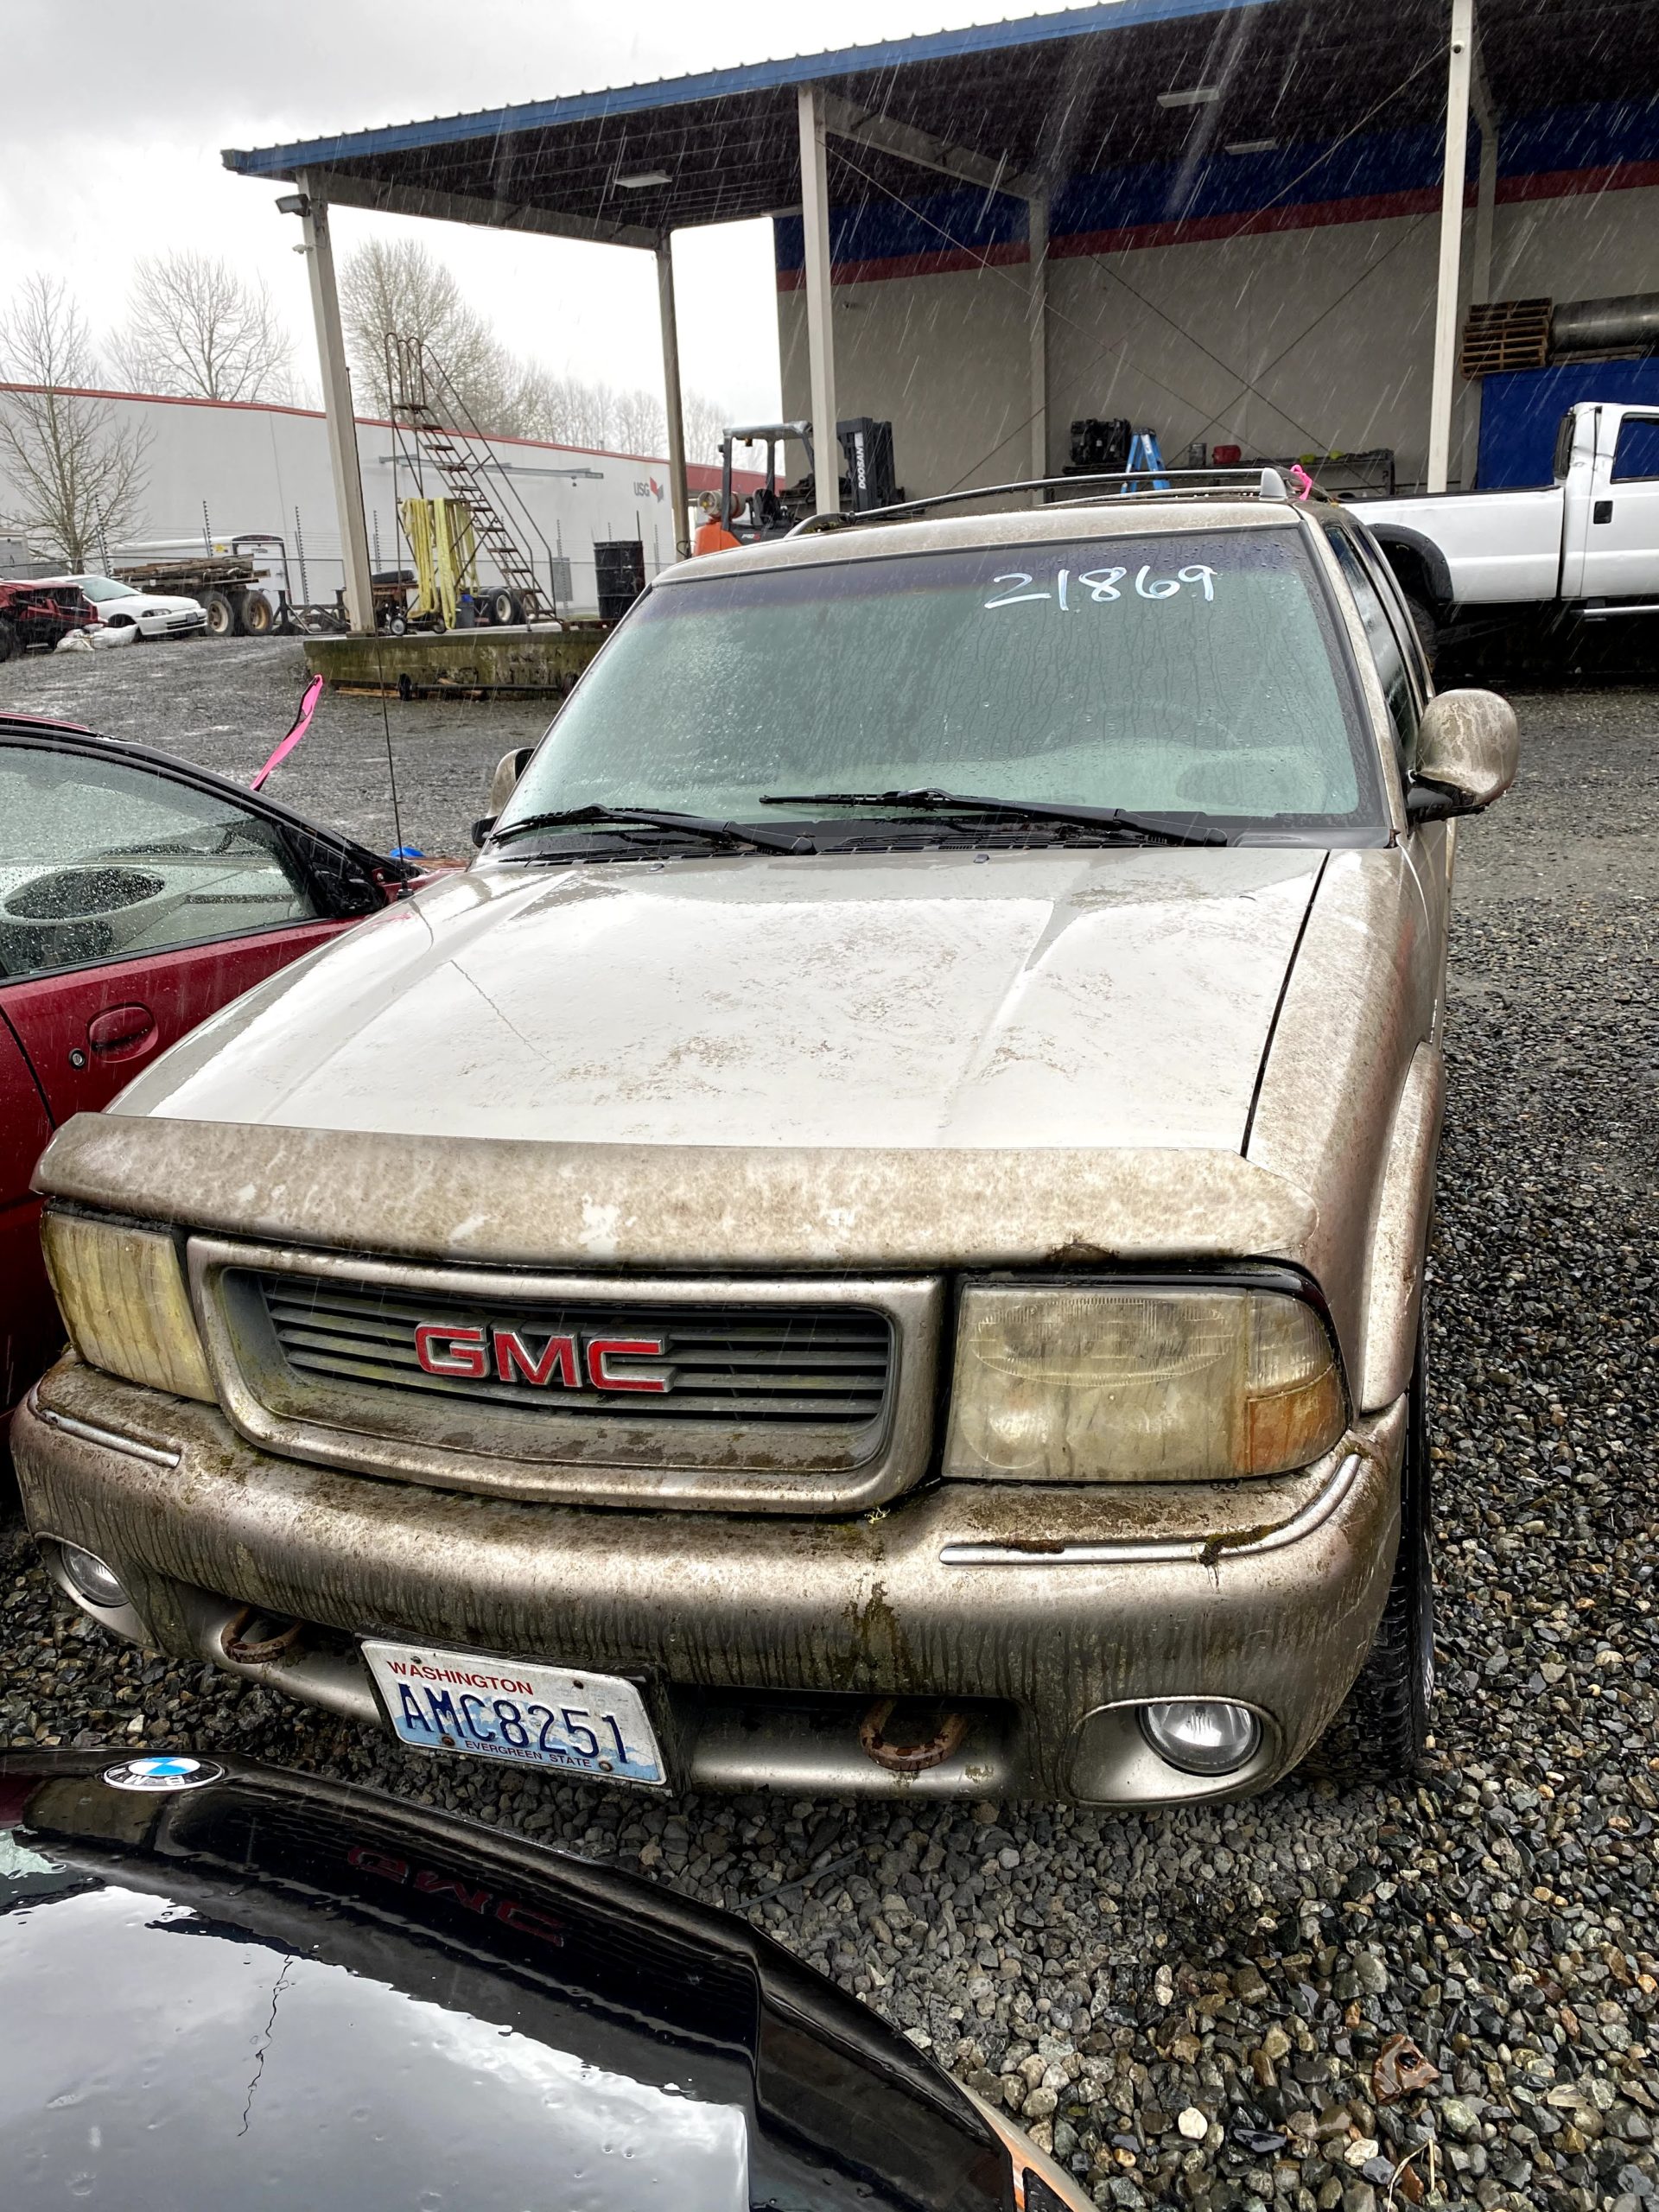 21869: 1998 - GMC - Envoy | Pro-Tow 24 Hr Towing